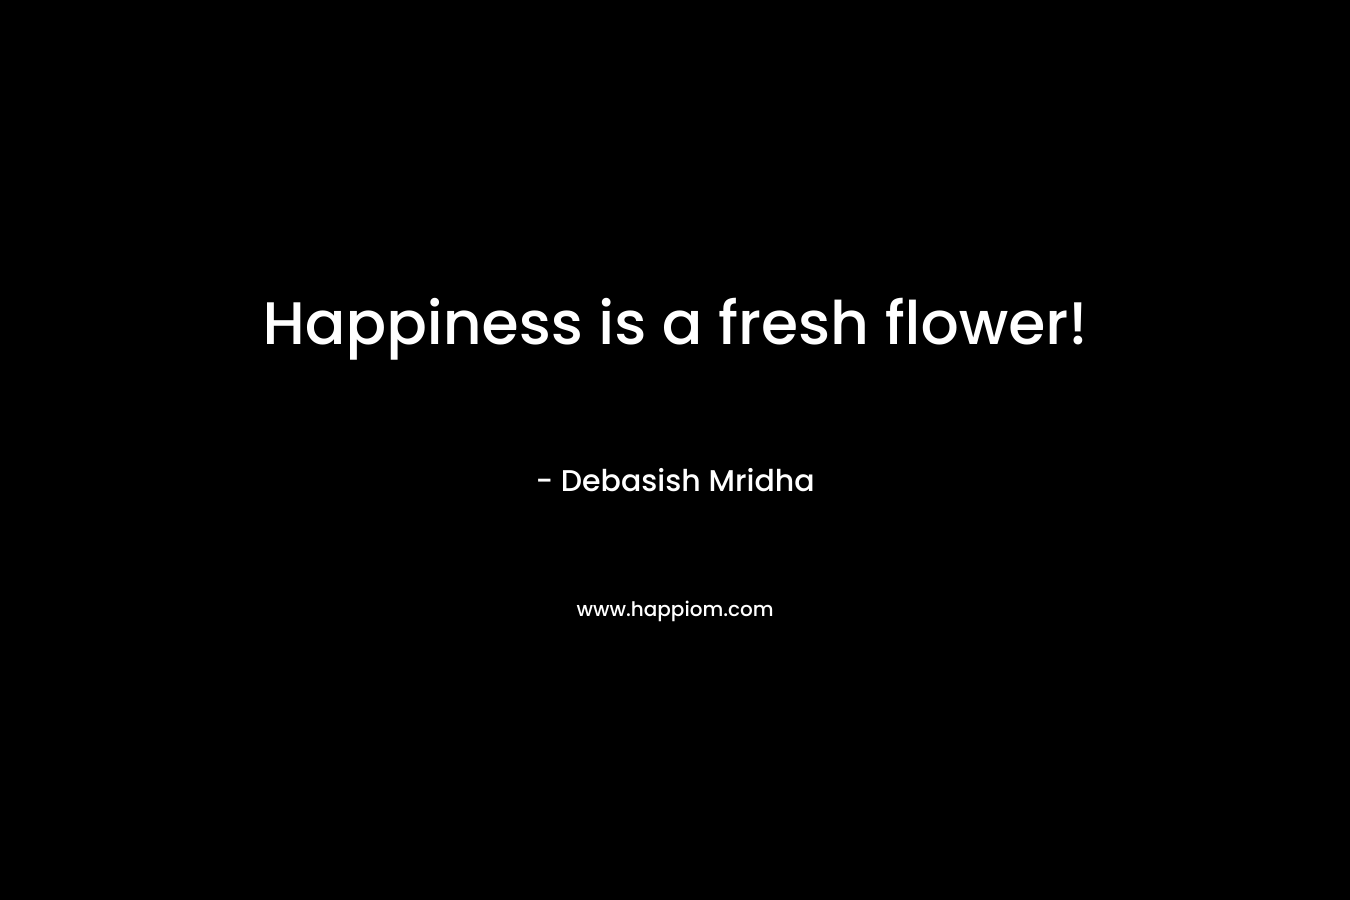 Happiness is a fresh flower!